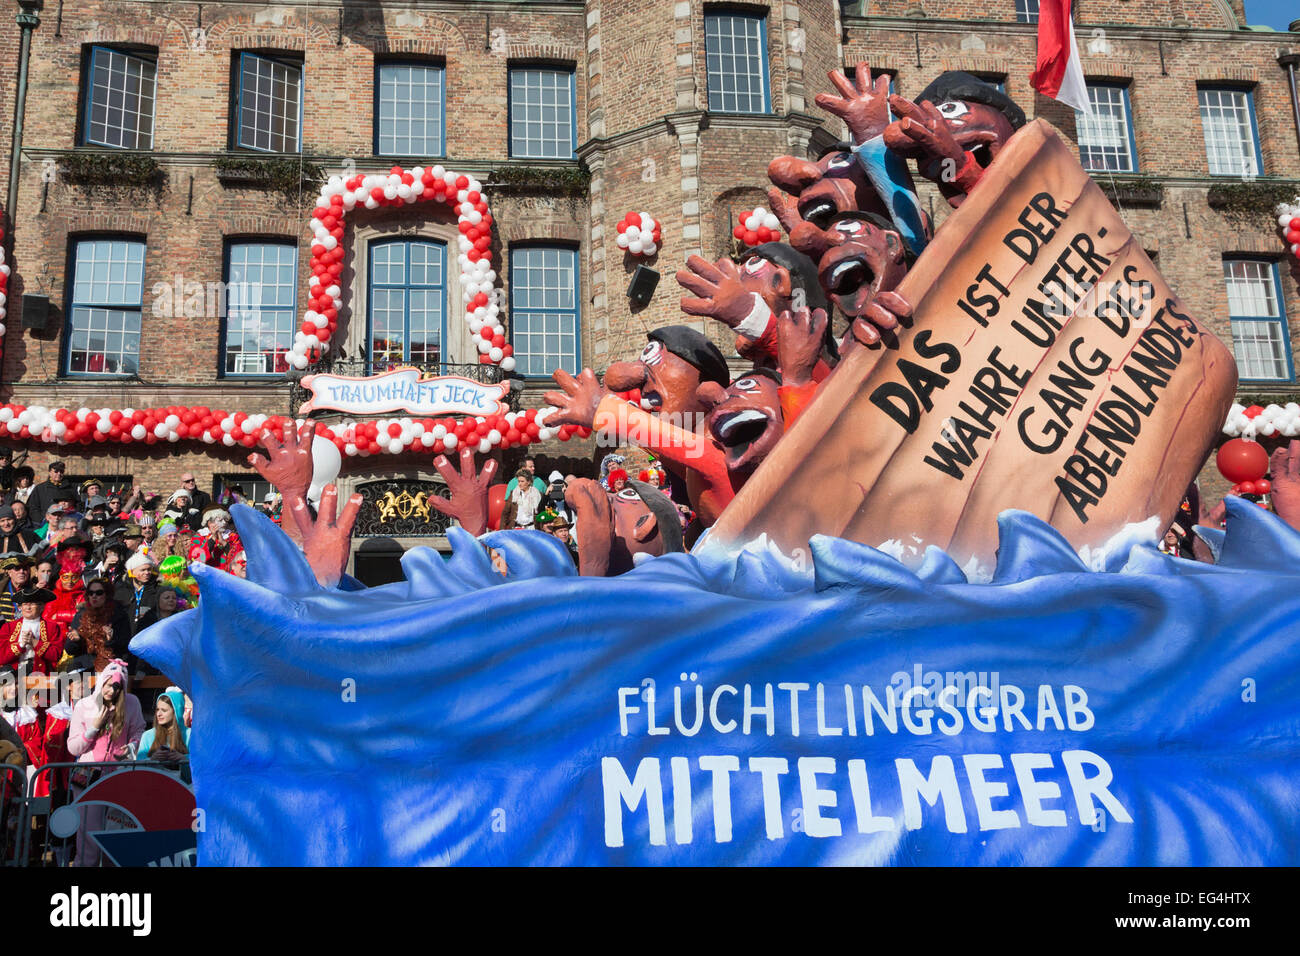 Düsseldorf, Germany. 16 February 2015. A float depicts refugees in a sinking ship on the Mediterranean.  The traditional Shrove Monday (Rosenmontag) carnival parade takes place in Düsseldorf, Germany. 1.2 million revellers lined the route. The Monday parades went ahead despite increased terror warnings which led to the parade in Brunswick (Braunschweig) being cancelled shortly before it was due to take place. Photo. carnivalpix/Alamy Live News Stock Photo